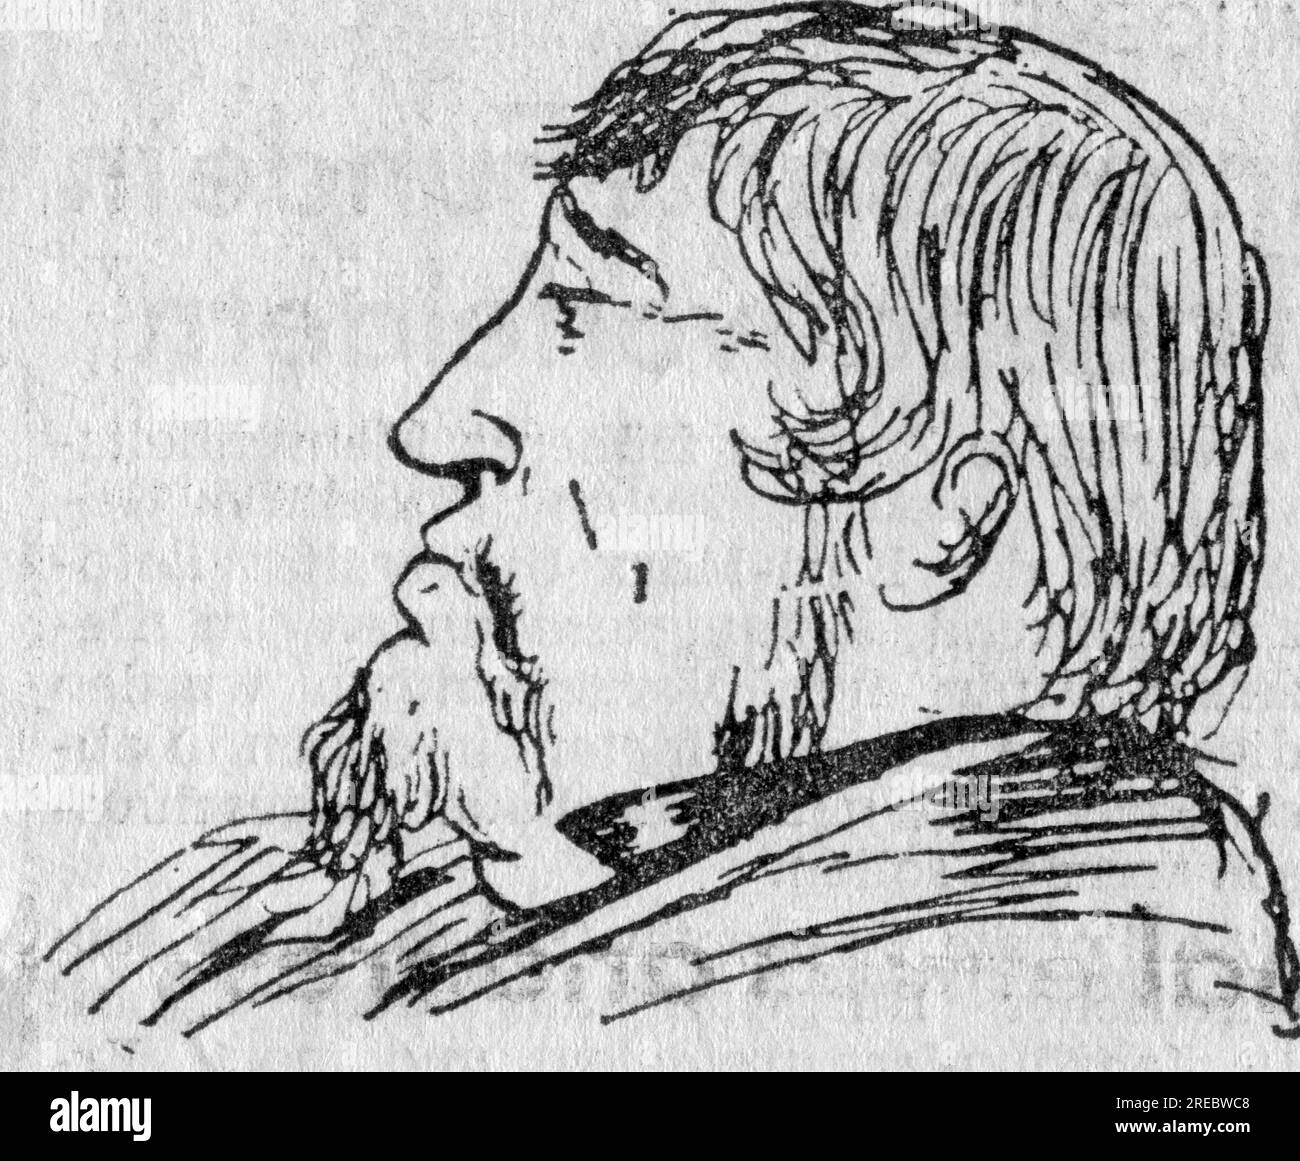 Turgenev, Ivan Sergeyevich, 9.11.1818 - 3.9.1883, Russian writer, a drawing by him: one big landowner, ADDITIONAL-RIGHTS-CLEARANCE-INFO-NOT-AVAILABLE Stock Photo